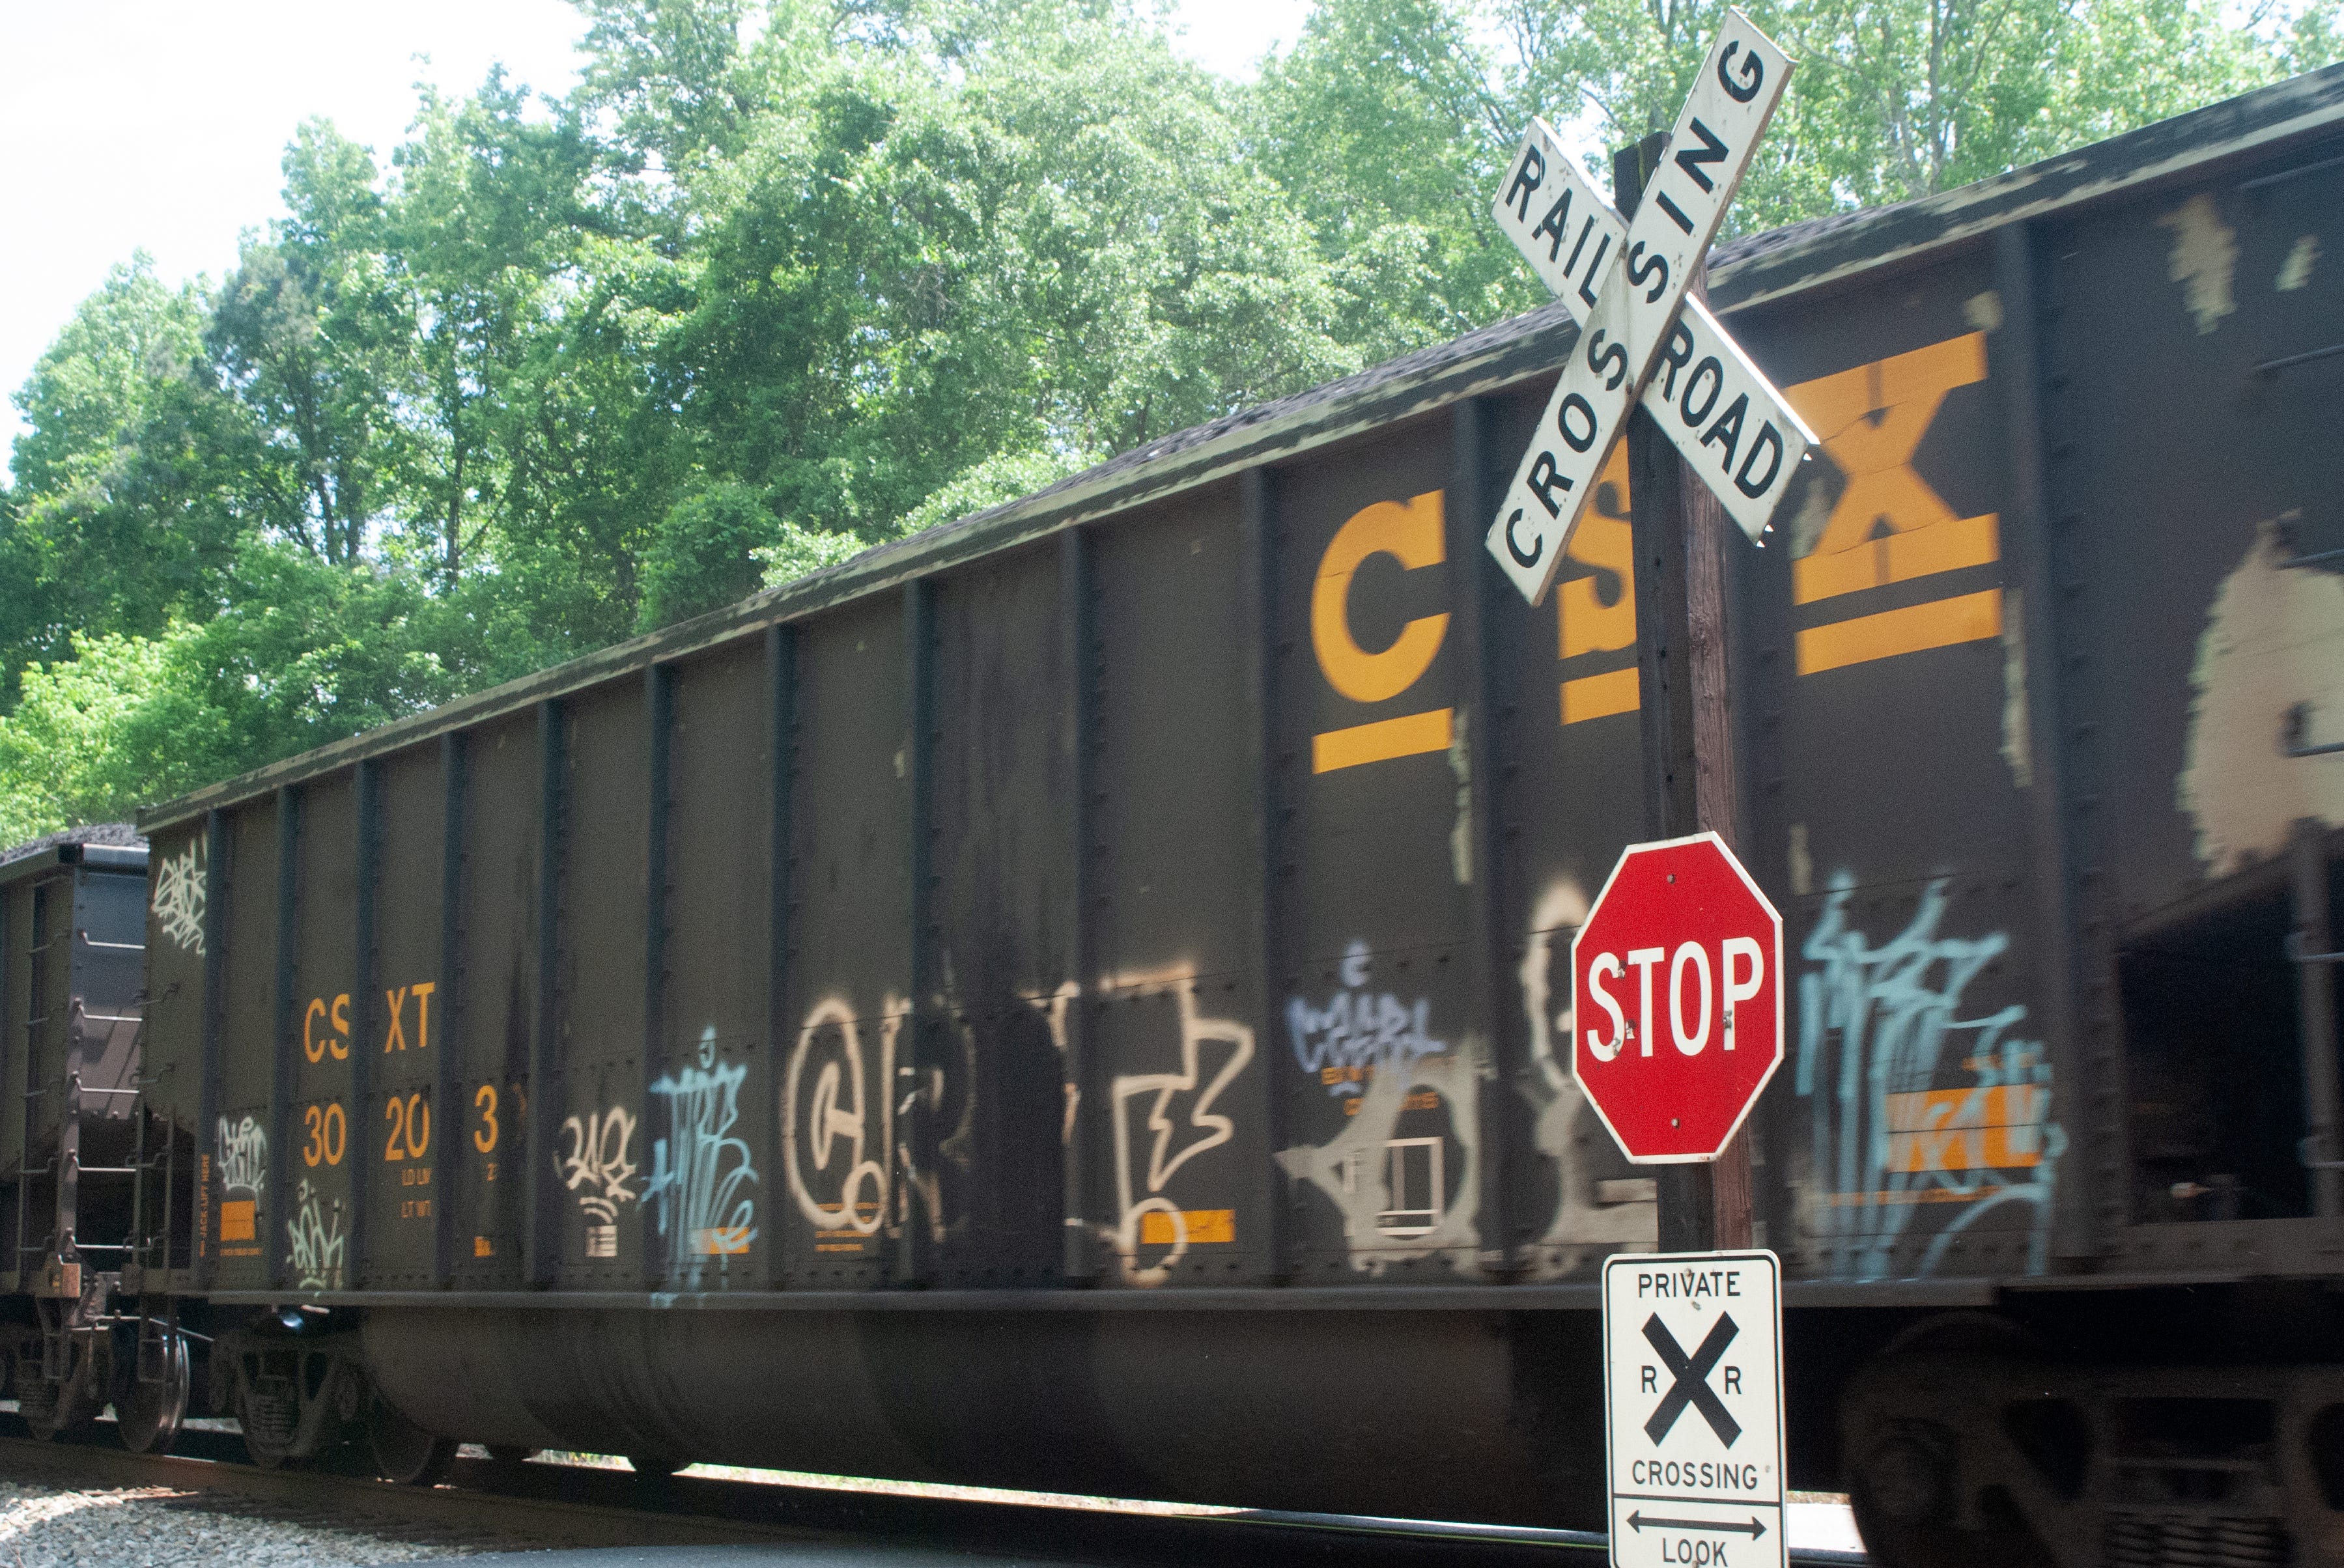 A CSX train travels across a private crossing in Lanexa, Virginia. Freeda Pruitt, 55, died at the crossing in 2021 after a CSX freight train t-boned her car.